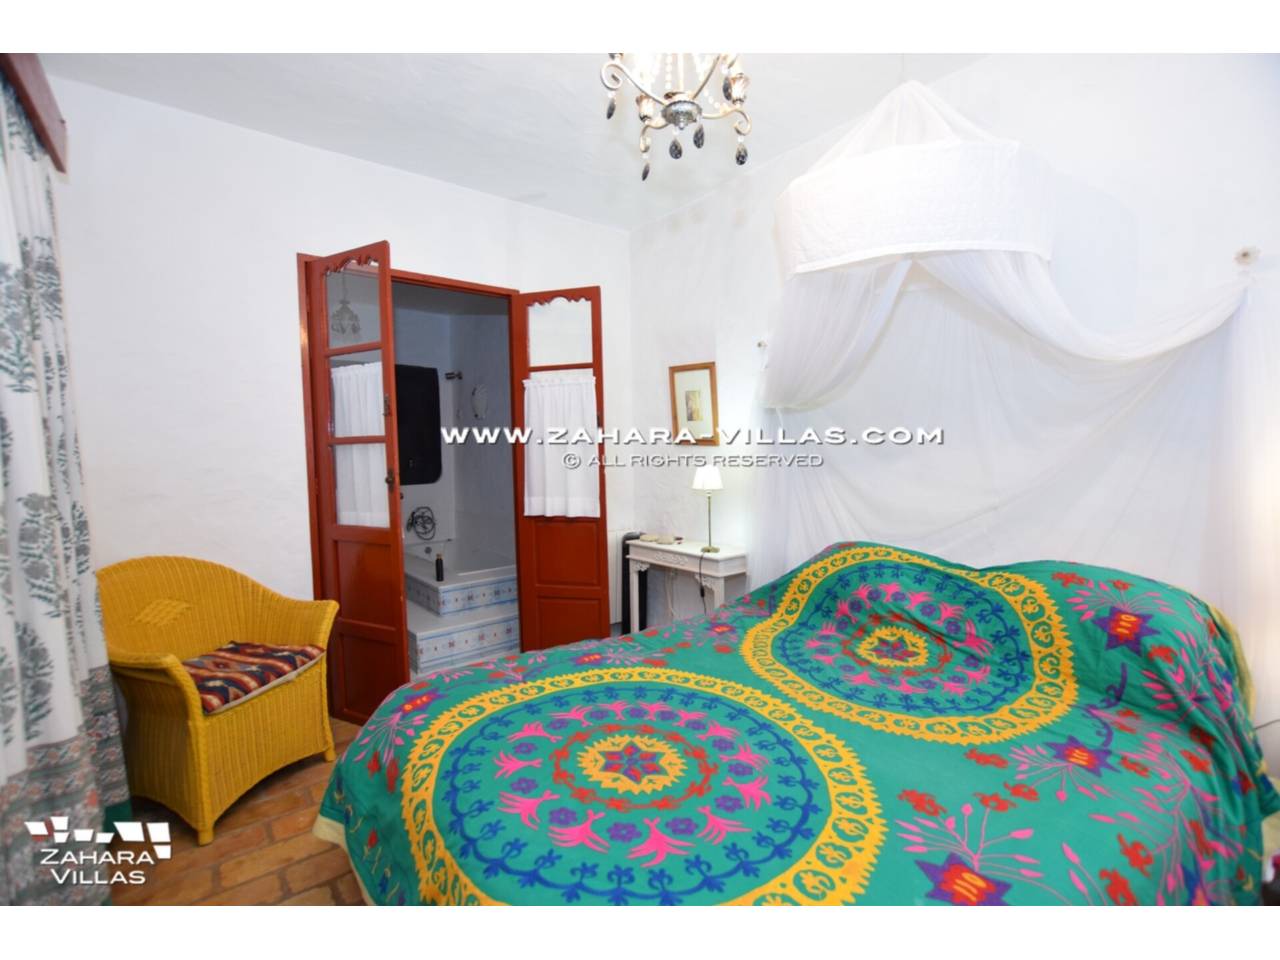 Imagen 29 de Magnificent House with central patio, in the historic center of the town